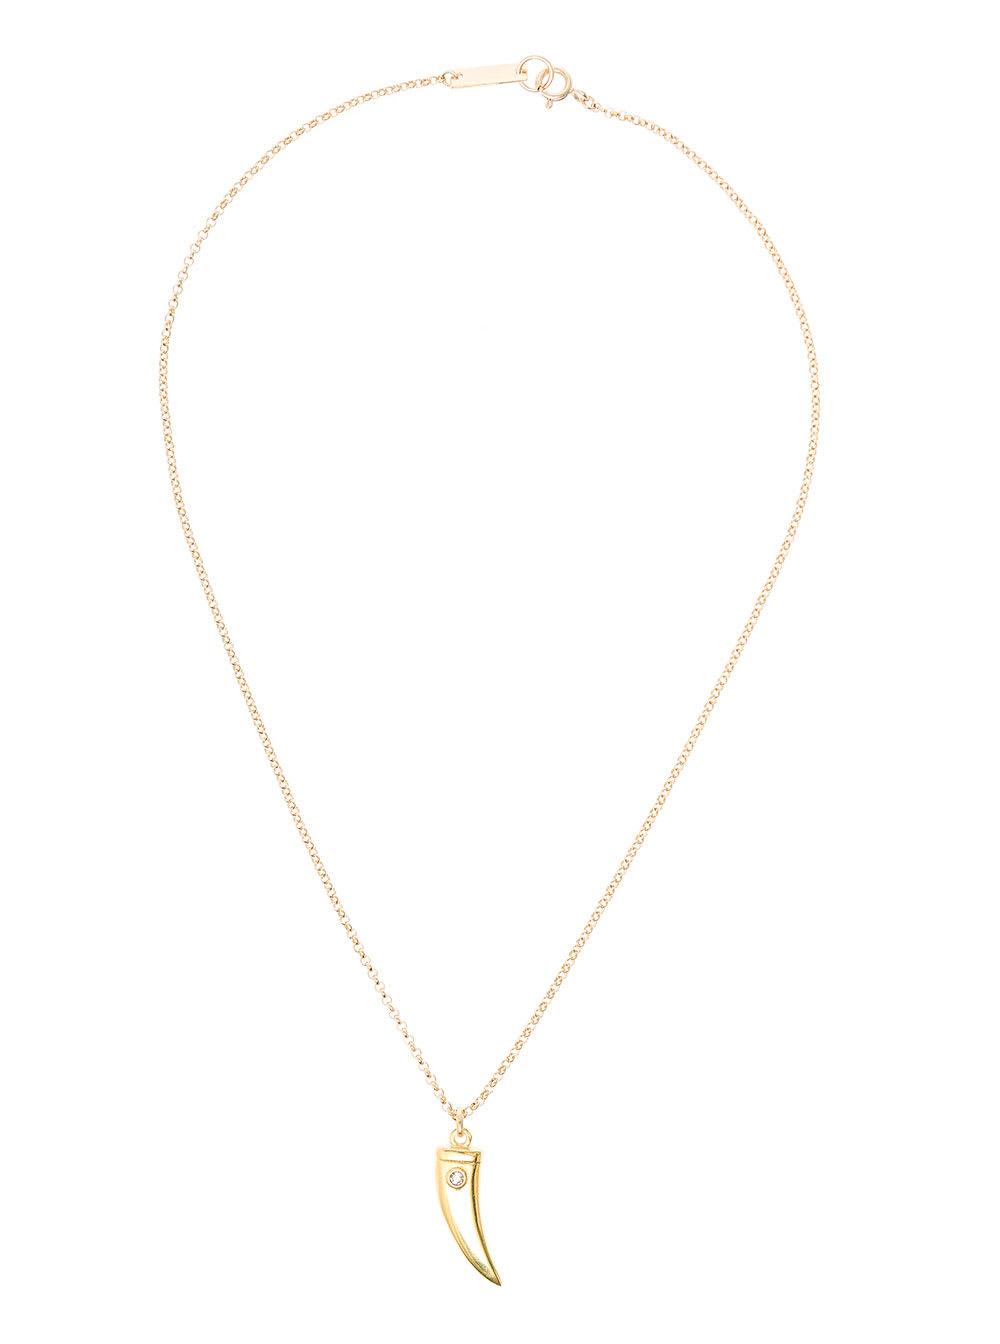 Isabel Marant Womans Gold Colored Metal Necklace With Horn Pendant